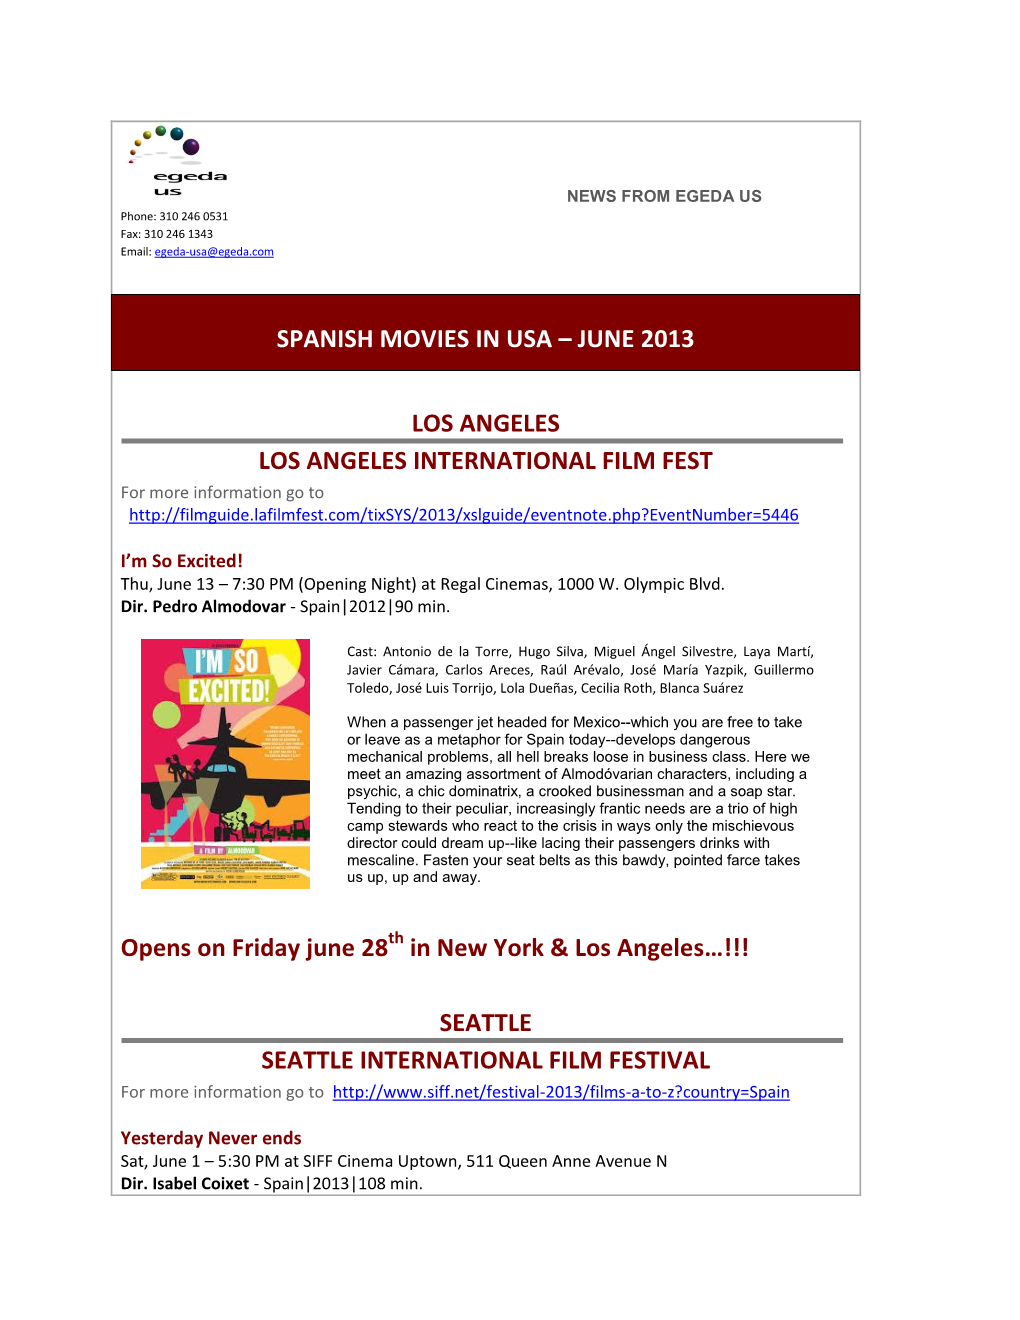 SEATTLE SEATTLE INTERNATIONAL FILM FESTIVAL for More Information Go To